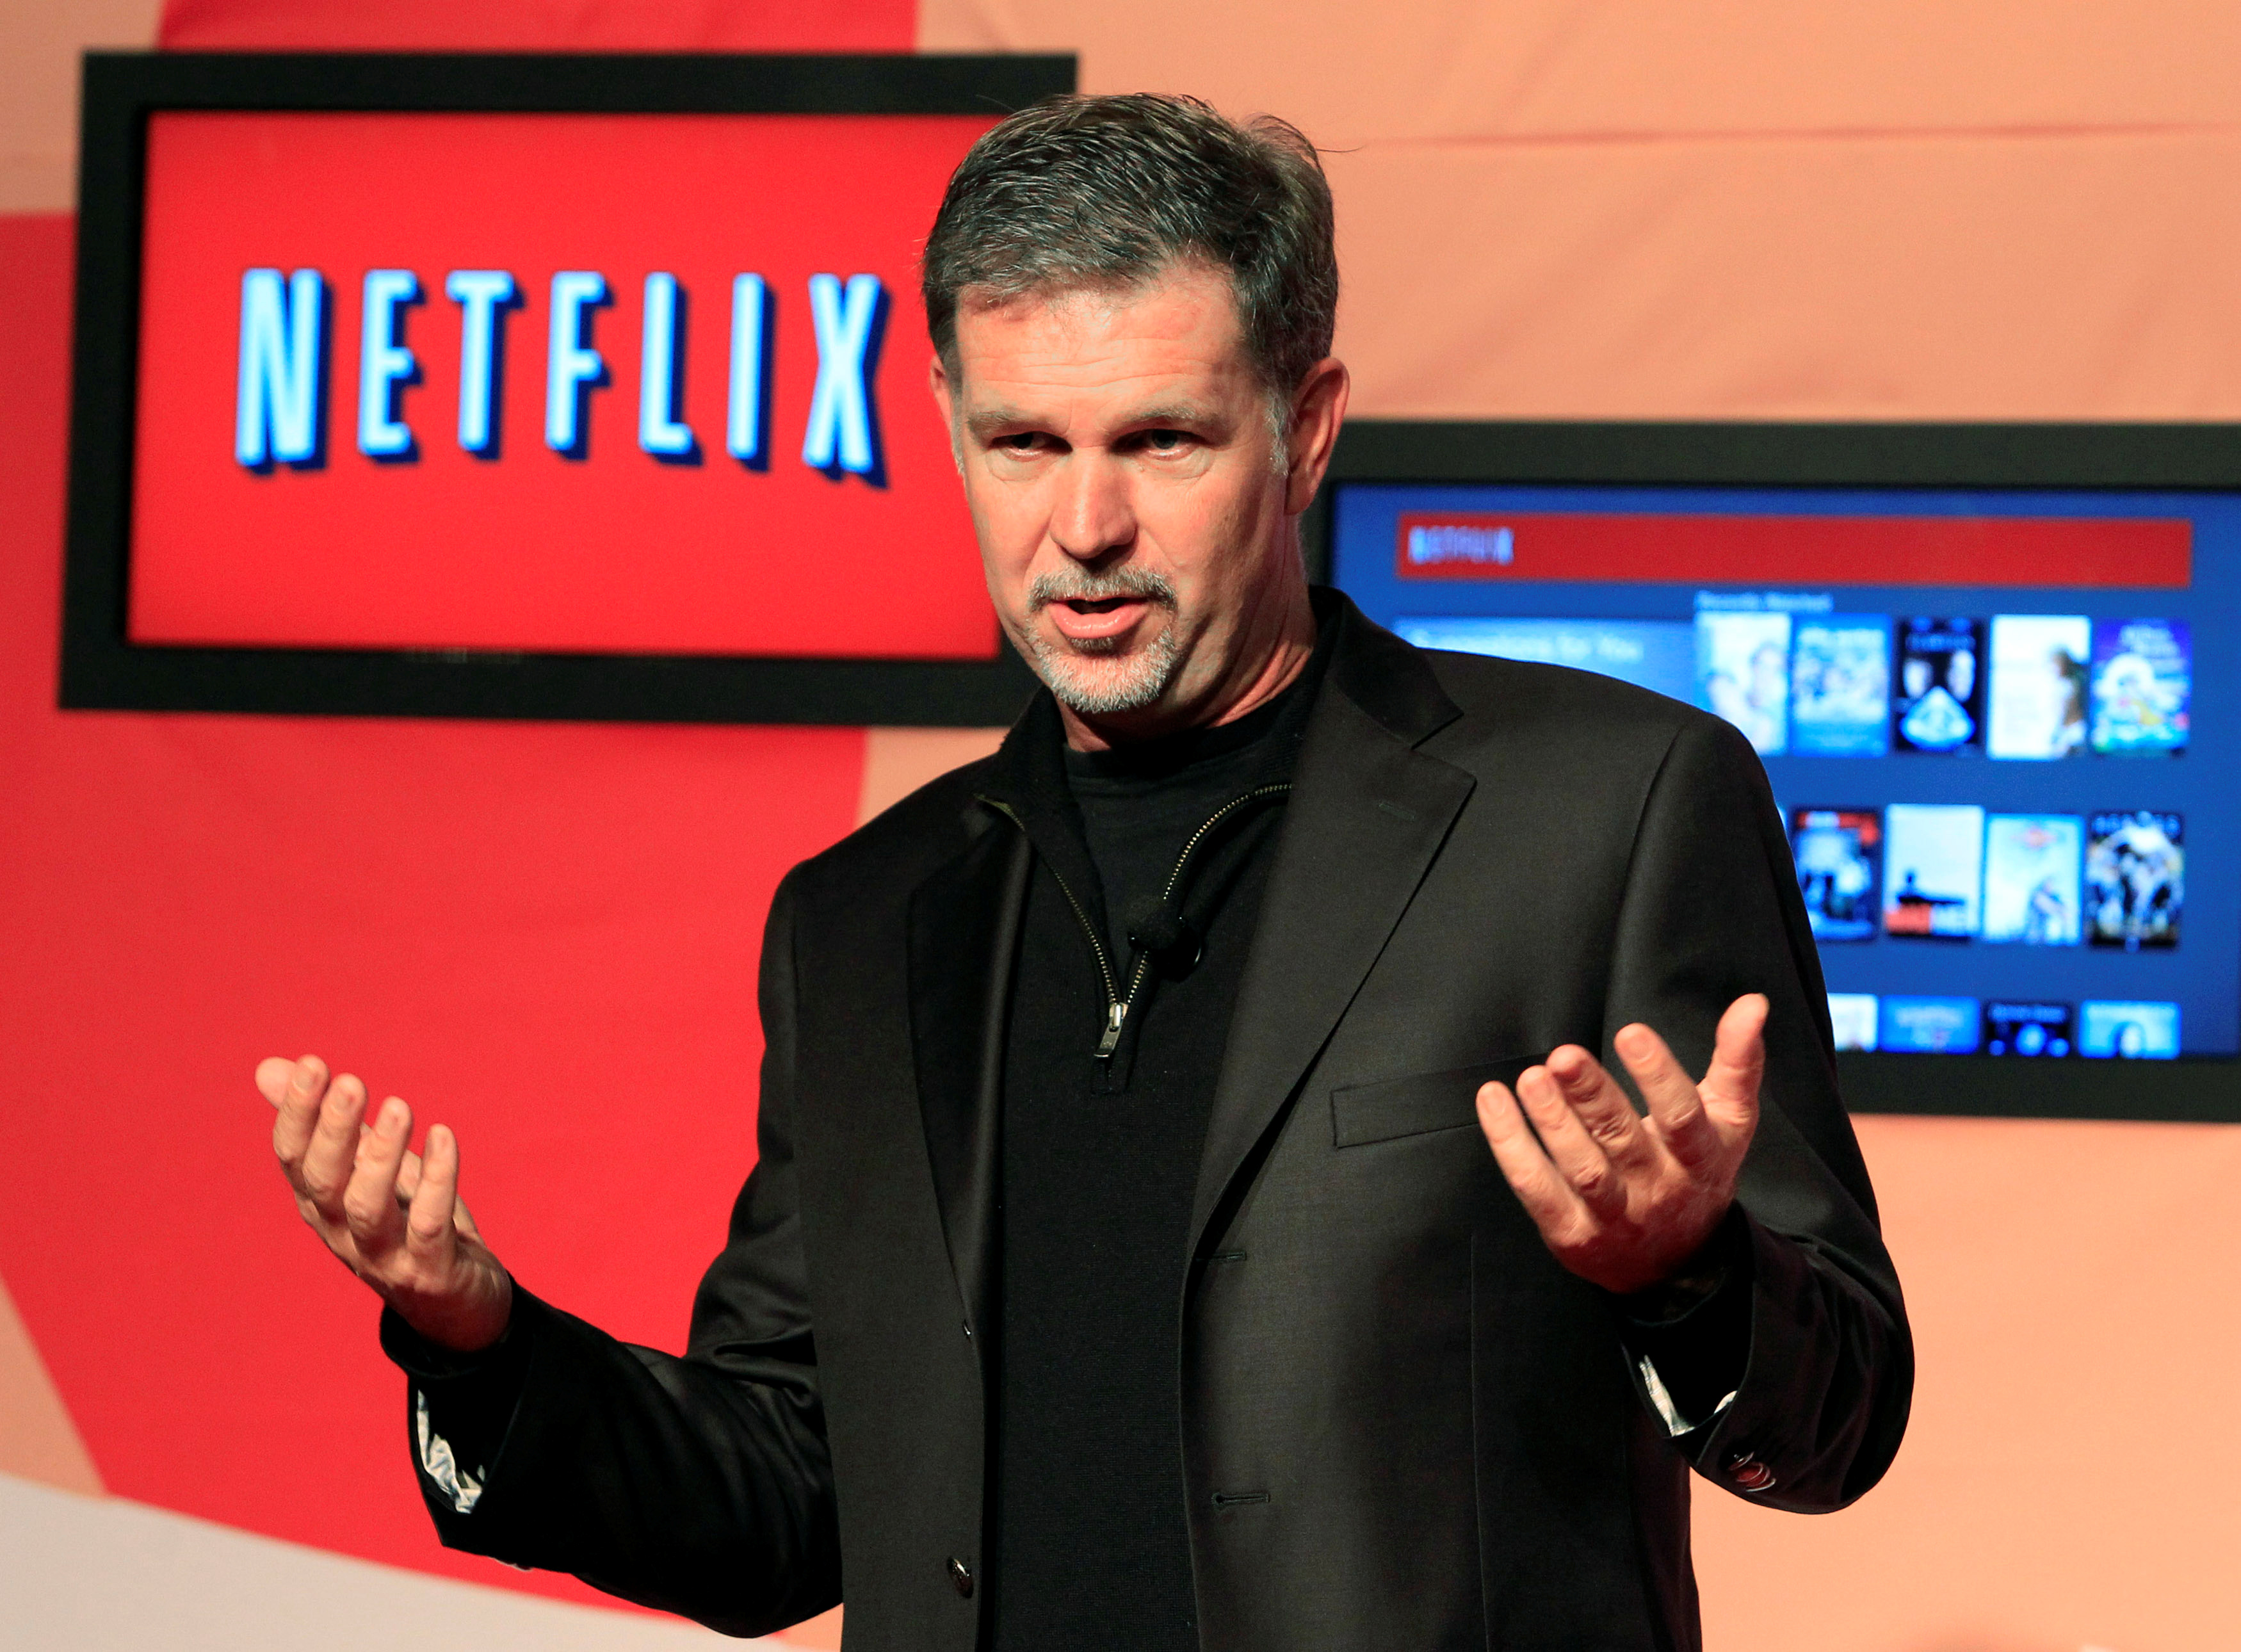 Reed Hastings in 2010 (Reuters/Mike Cassese/FilePhoto)